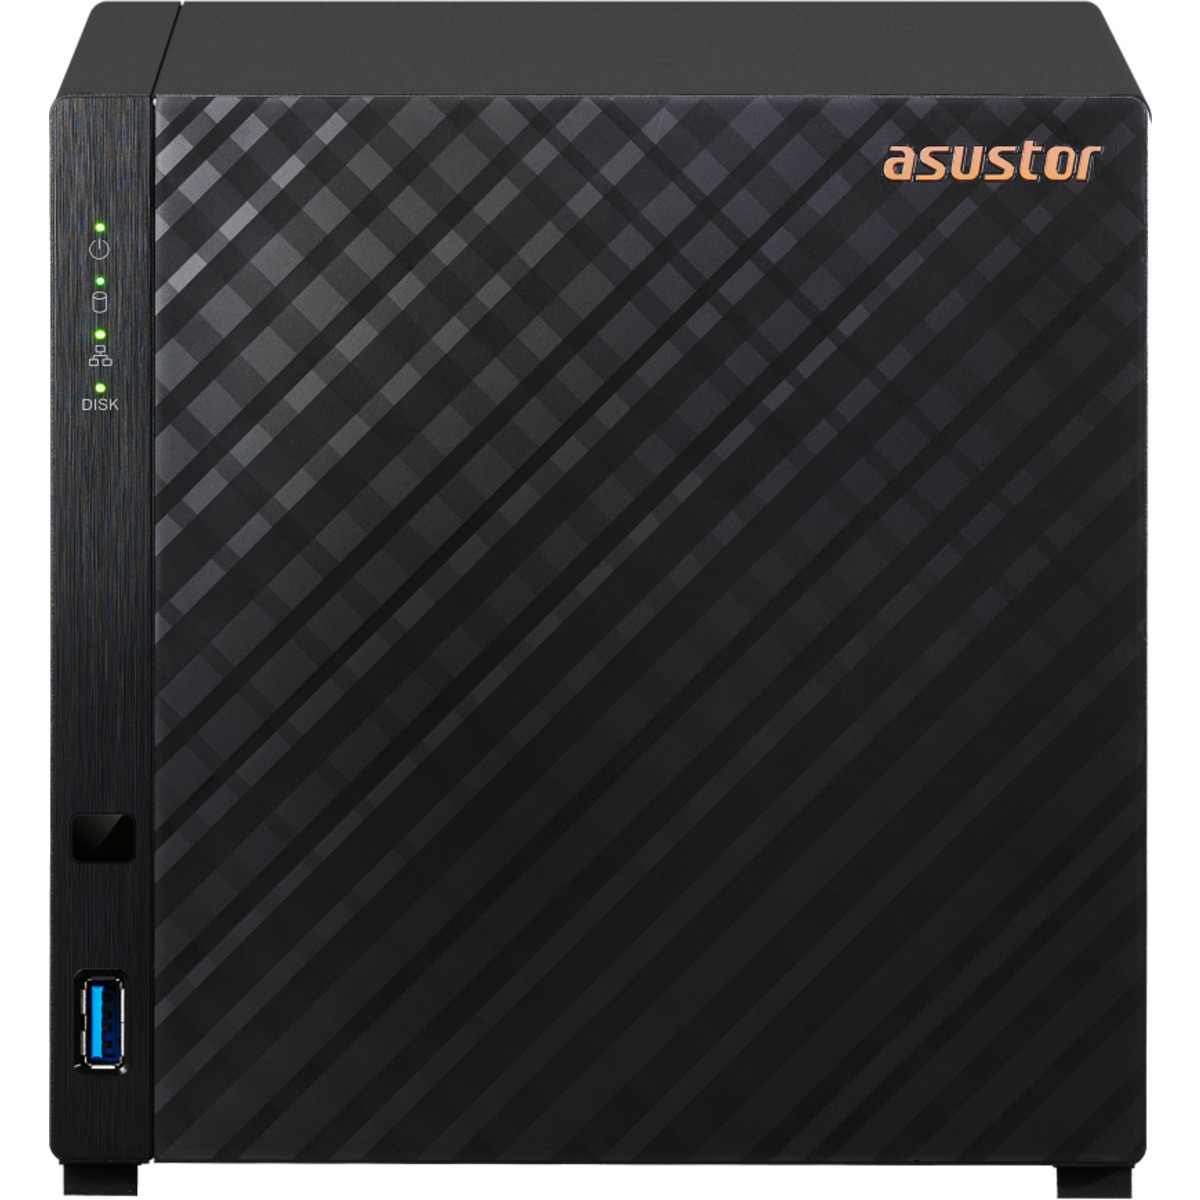 buy ASUSTOR DRIVESTOR 4 AS1104T 8tb Desktop NAS - Network Attached Storage Device 4x2000gb Seagate BarraCuda ST2000DM008 3.5 7200rpm SATA 6Gb/s HDD CONSUMER Class Drives Installed - Burn-In Tested - nas headquarters buy network attached storage server device das new raid-5 free shipping usa spring sale DRIVESTOR 4 AS1104T